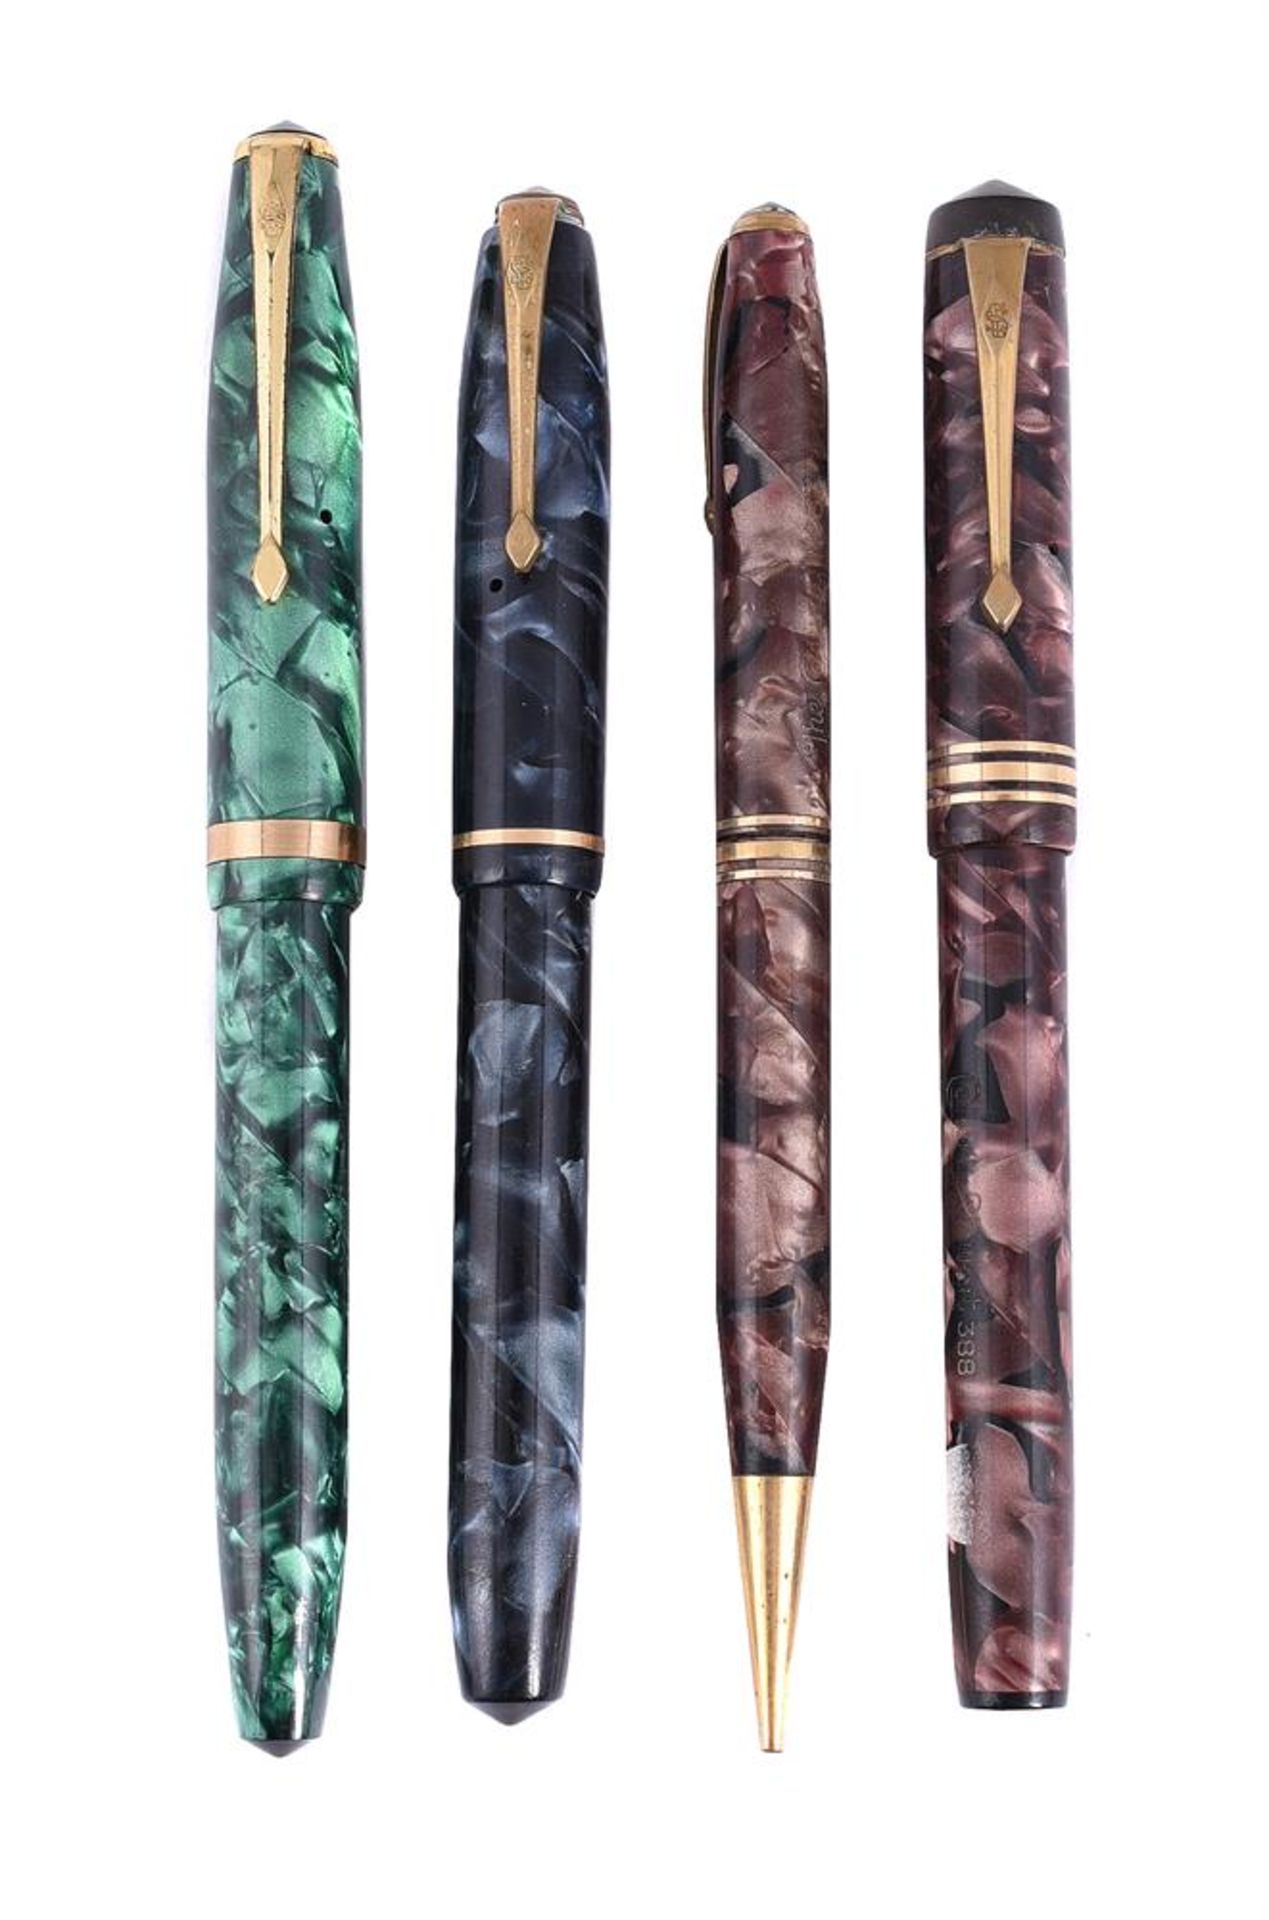 CONWAY STEWART, A COLLECTION OF MARBLED FOUNTAIN PENS